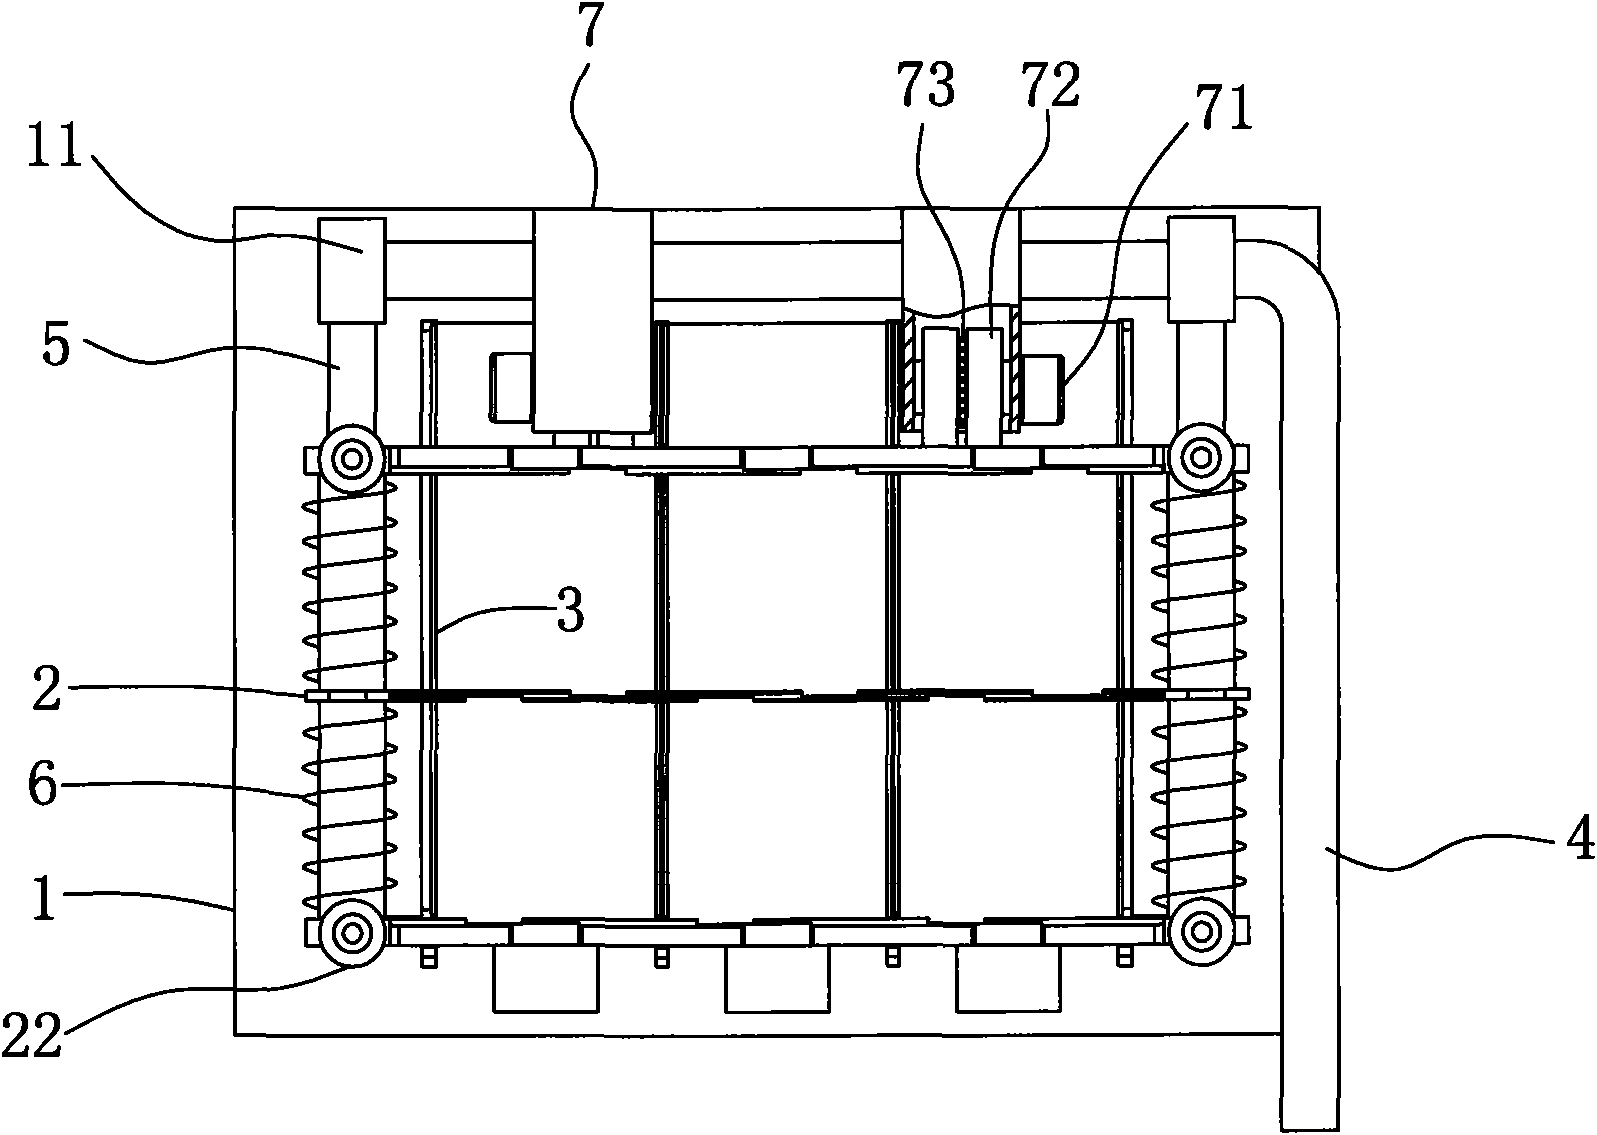 Modified structure of battery integral installation jig